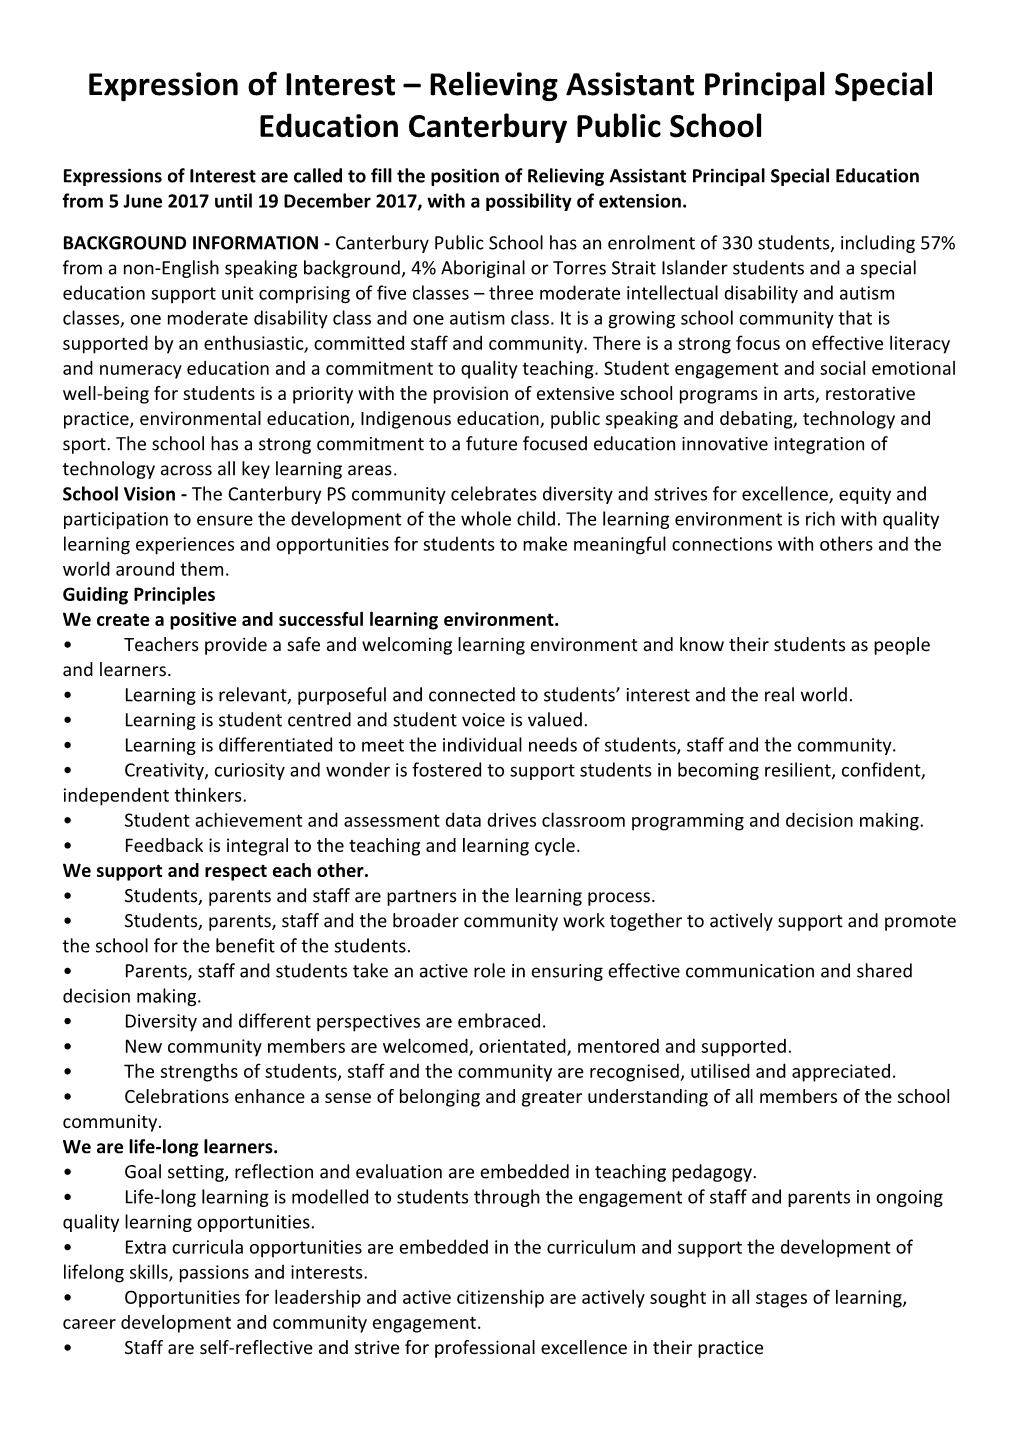 Expression of Interest Relieving Assistant Principal Special Education Canterbury Public